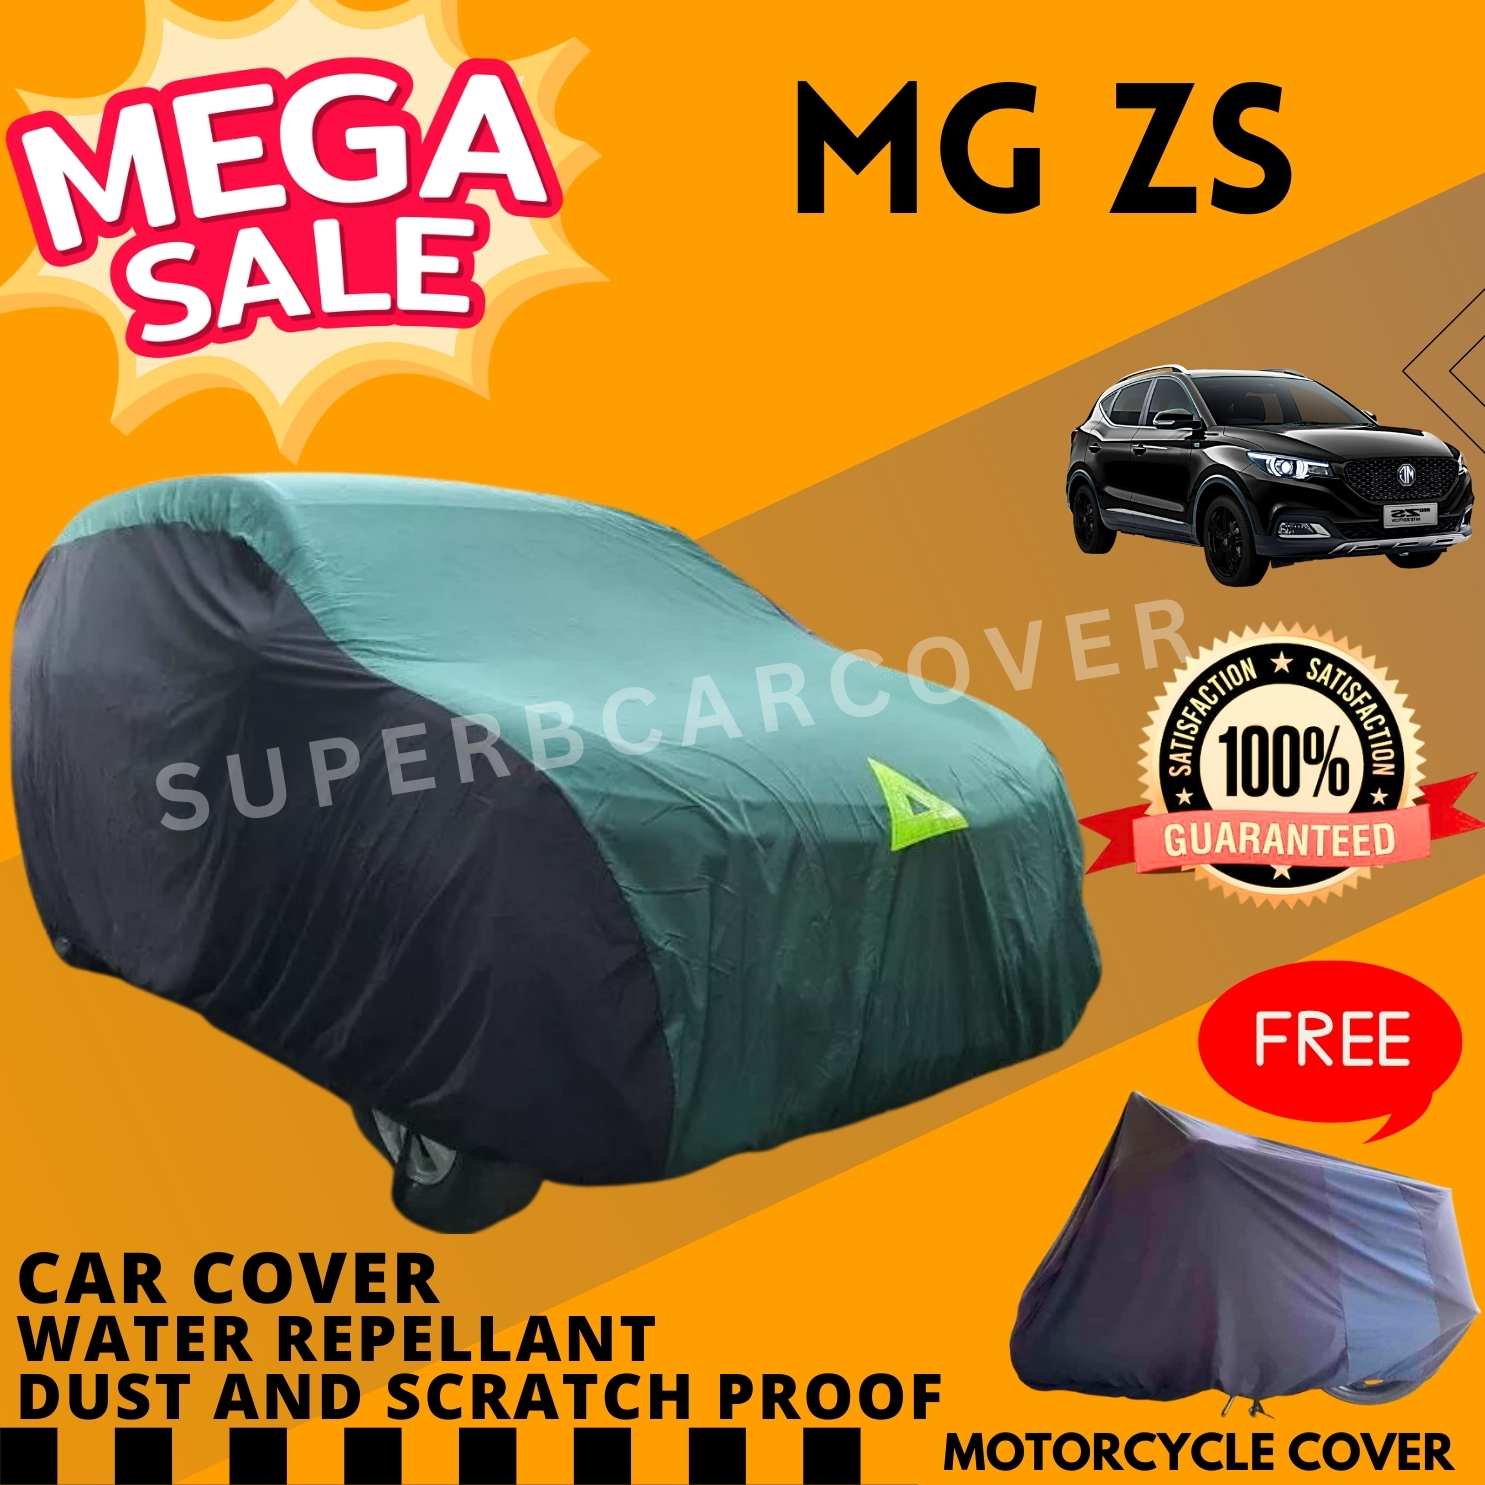 MG ZS HIGH QUALITY CAR COVER - WATER REPELLANT, AND DUST PROOF - WITH FREE MOTOR  COVER